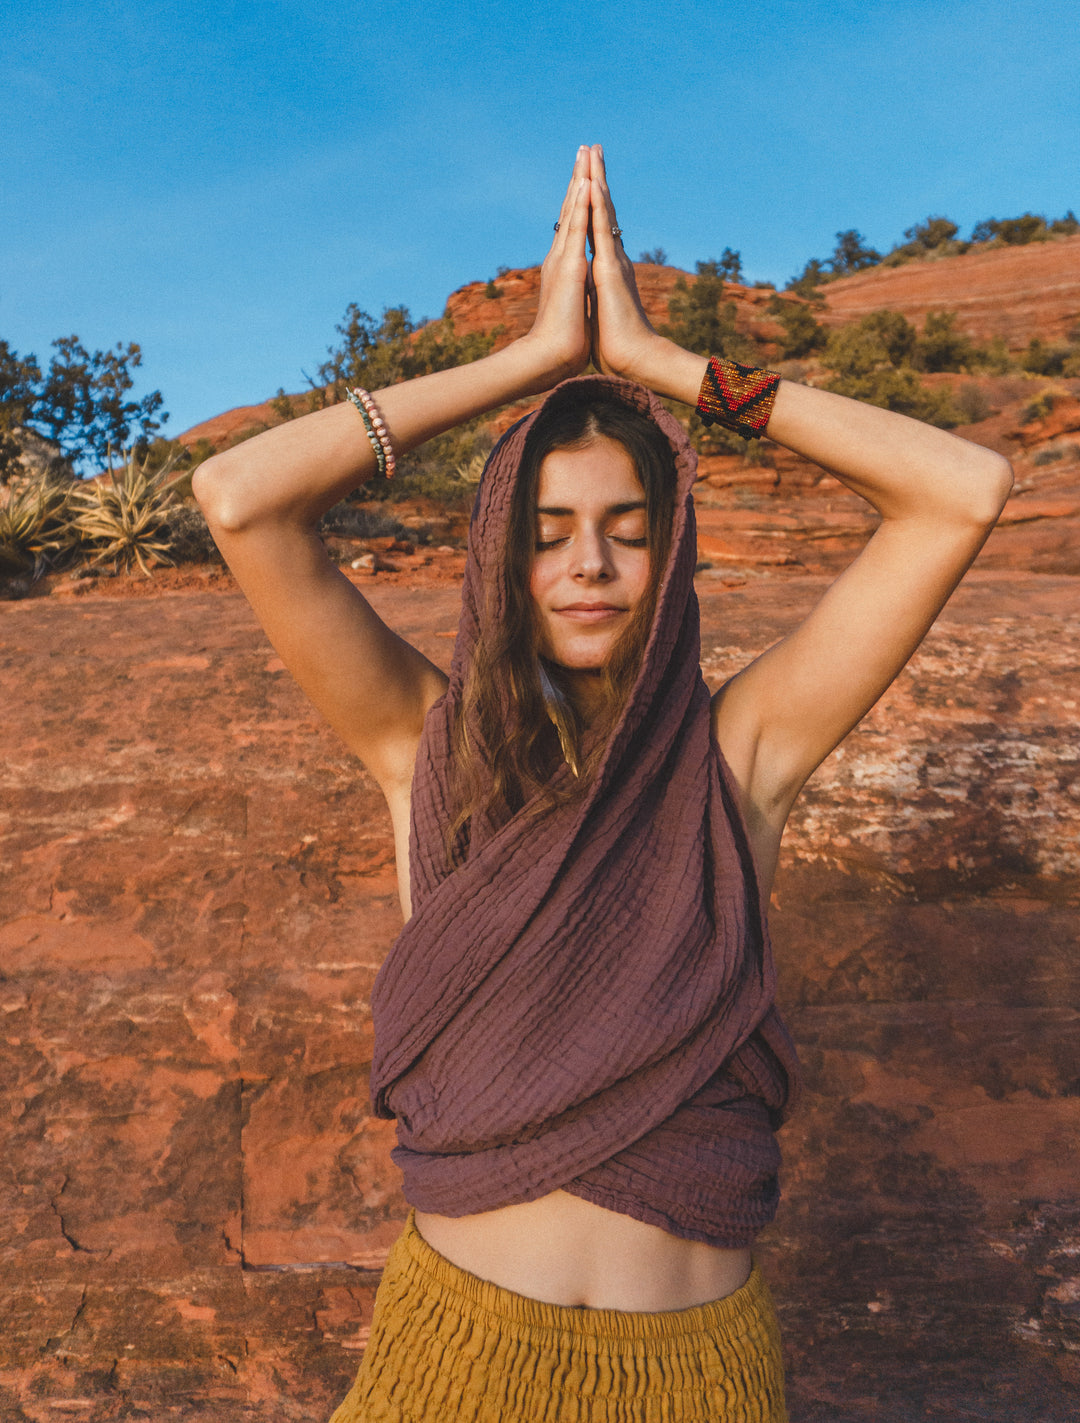 Woman has earthen rose colored scarf wrapped around head and upper body as a top. She has on gold-color bottoms and stands in a yoga pose with hands in prayer above her head.